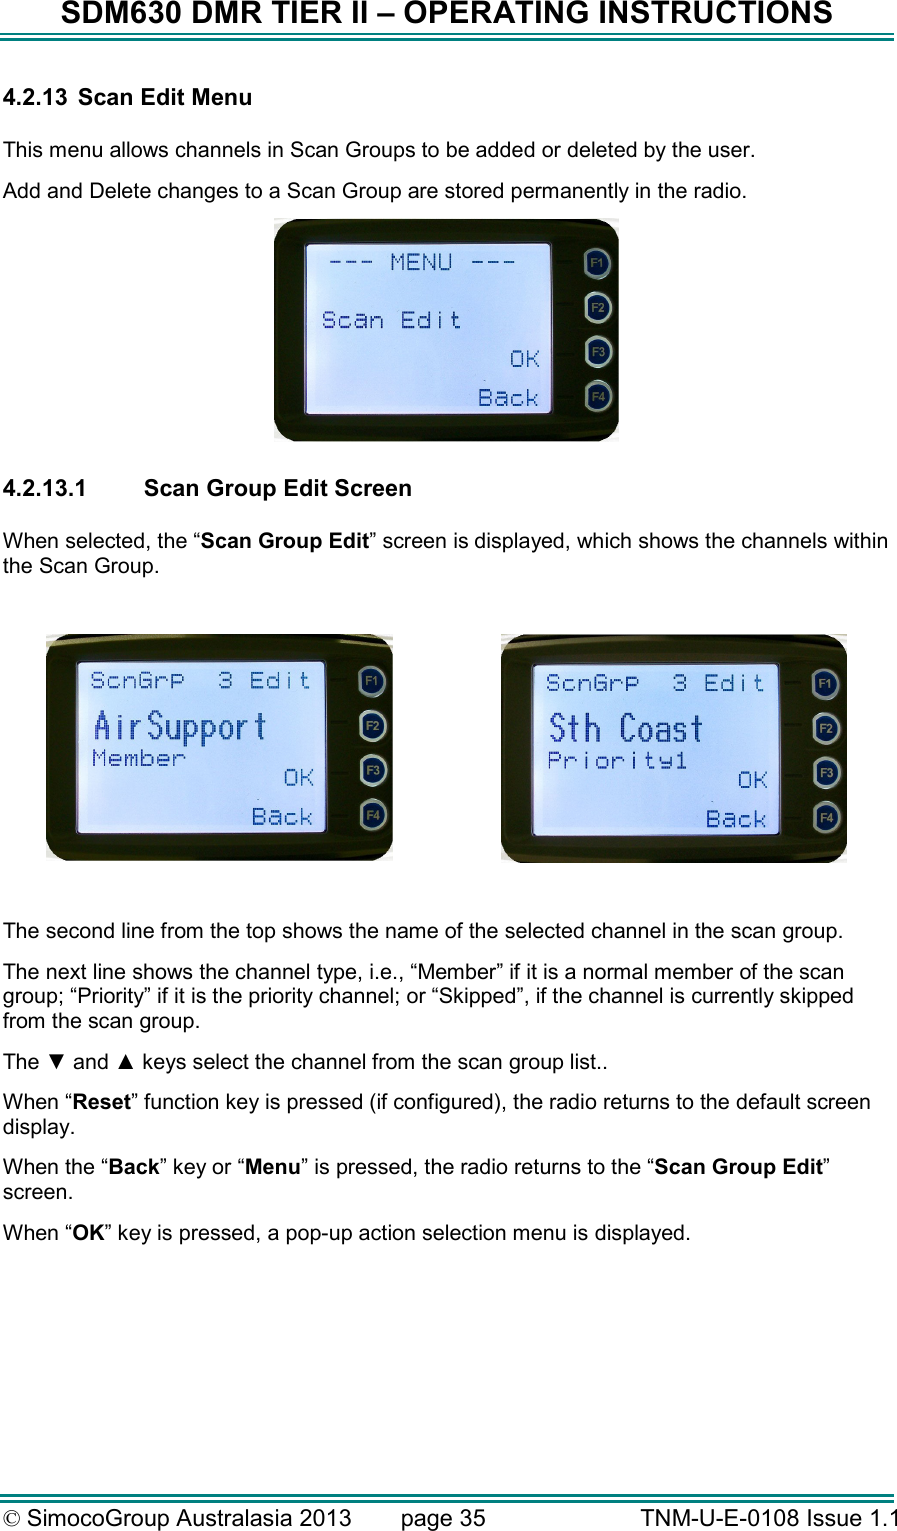 SDM630 DMR TIER II – OPERATING INSTRUCTIONS © SimocoGroup Australasia 2013   page 35   TNM-U-E-0108 Issue 1.1 4.2.13  Scan Edit Menu  This menu allows channels in Scan Groups to be added or deleted by the user.   Add and Delete changes to a Scan Group are stored permanently in the radio.     4.2.13.1  Scan Group Edit Screen  When selected, the “Scan Group Edit” screen is displayed, which shows the channels within the Scan Group.       The second line from the top shows the name of the selected channel in the scan group.   The next line shows the channel type, i.e., “Member” if it is a normal member of the scan group; “Priority” if it is the priority channel; or “Skipped”, if the channel is currently skipped from the scan group.  The ▼ and ▲ keys select the channel from the scan group list.. When “Reset” function key is pressed (if configured), the radio returns to the default screen display. When the “Back” key or “Menu” is pressed, the radio returns to the “Scan Group Edit” screen. When “OK” key is pressed, a pop-up action selection menu is displayed. 